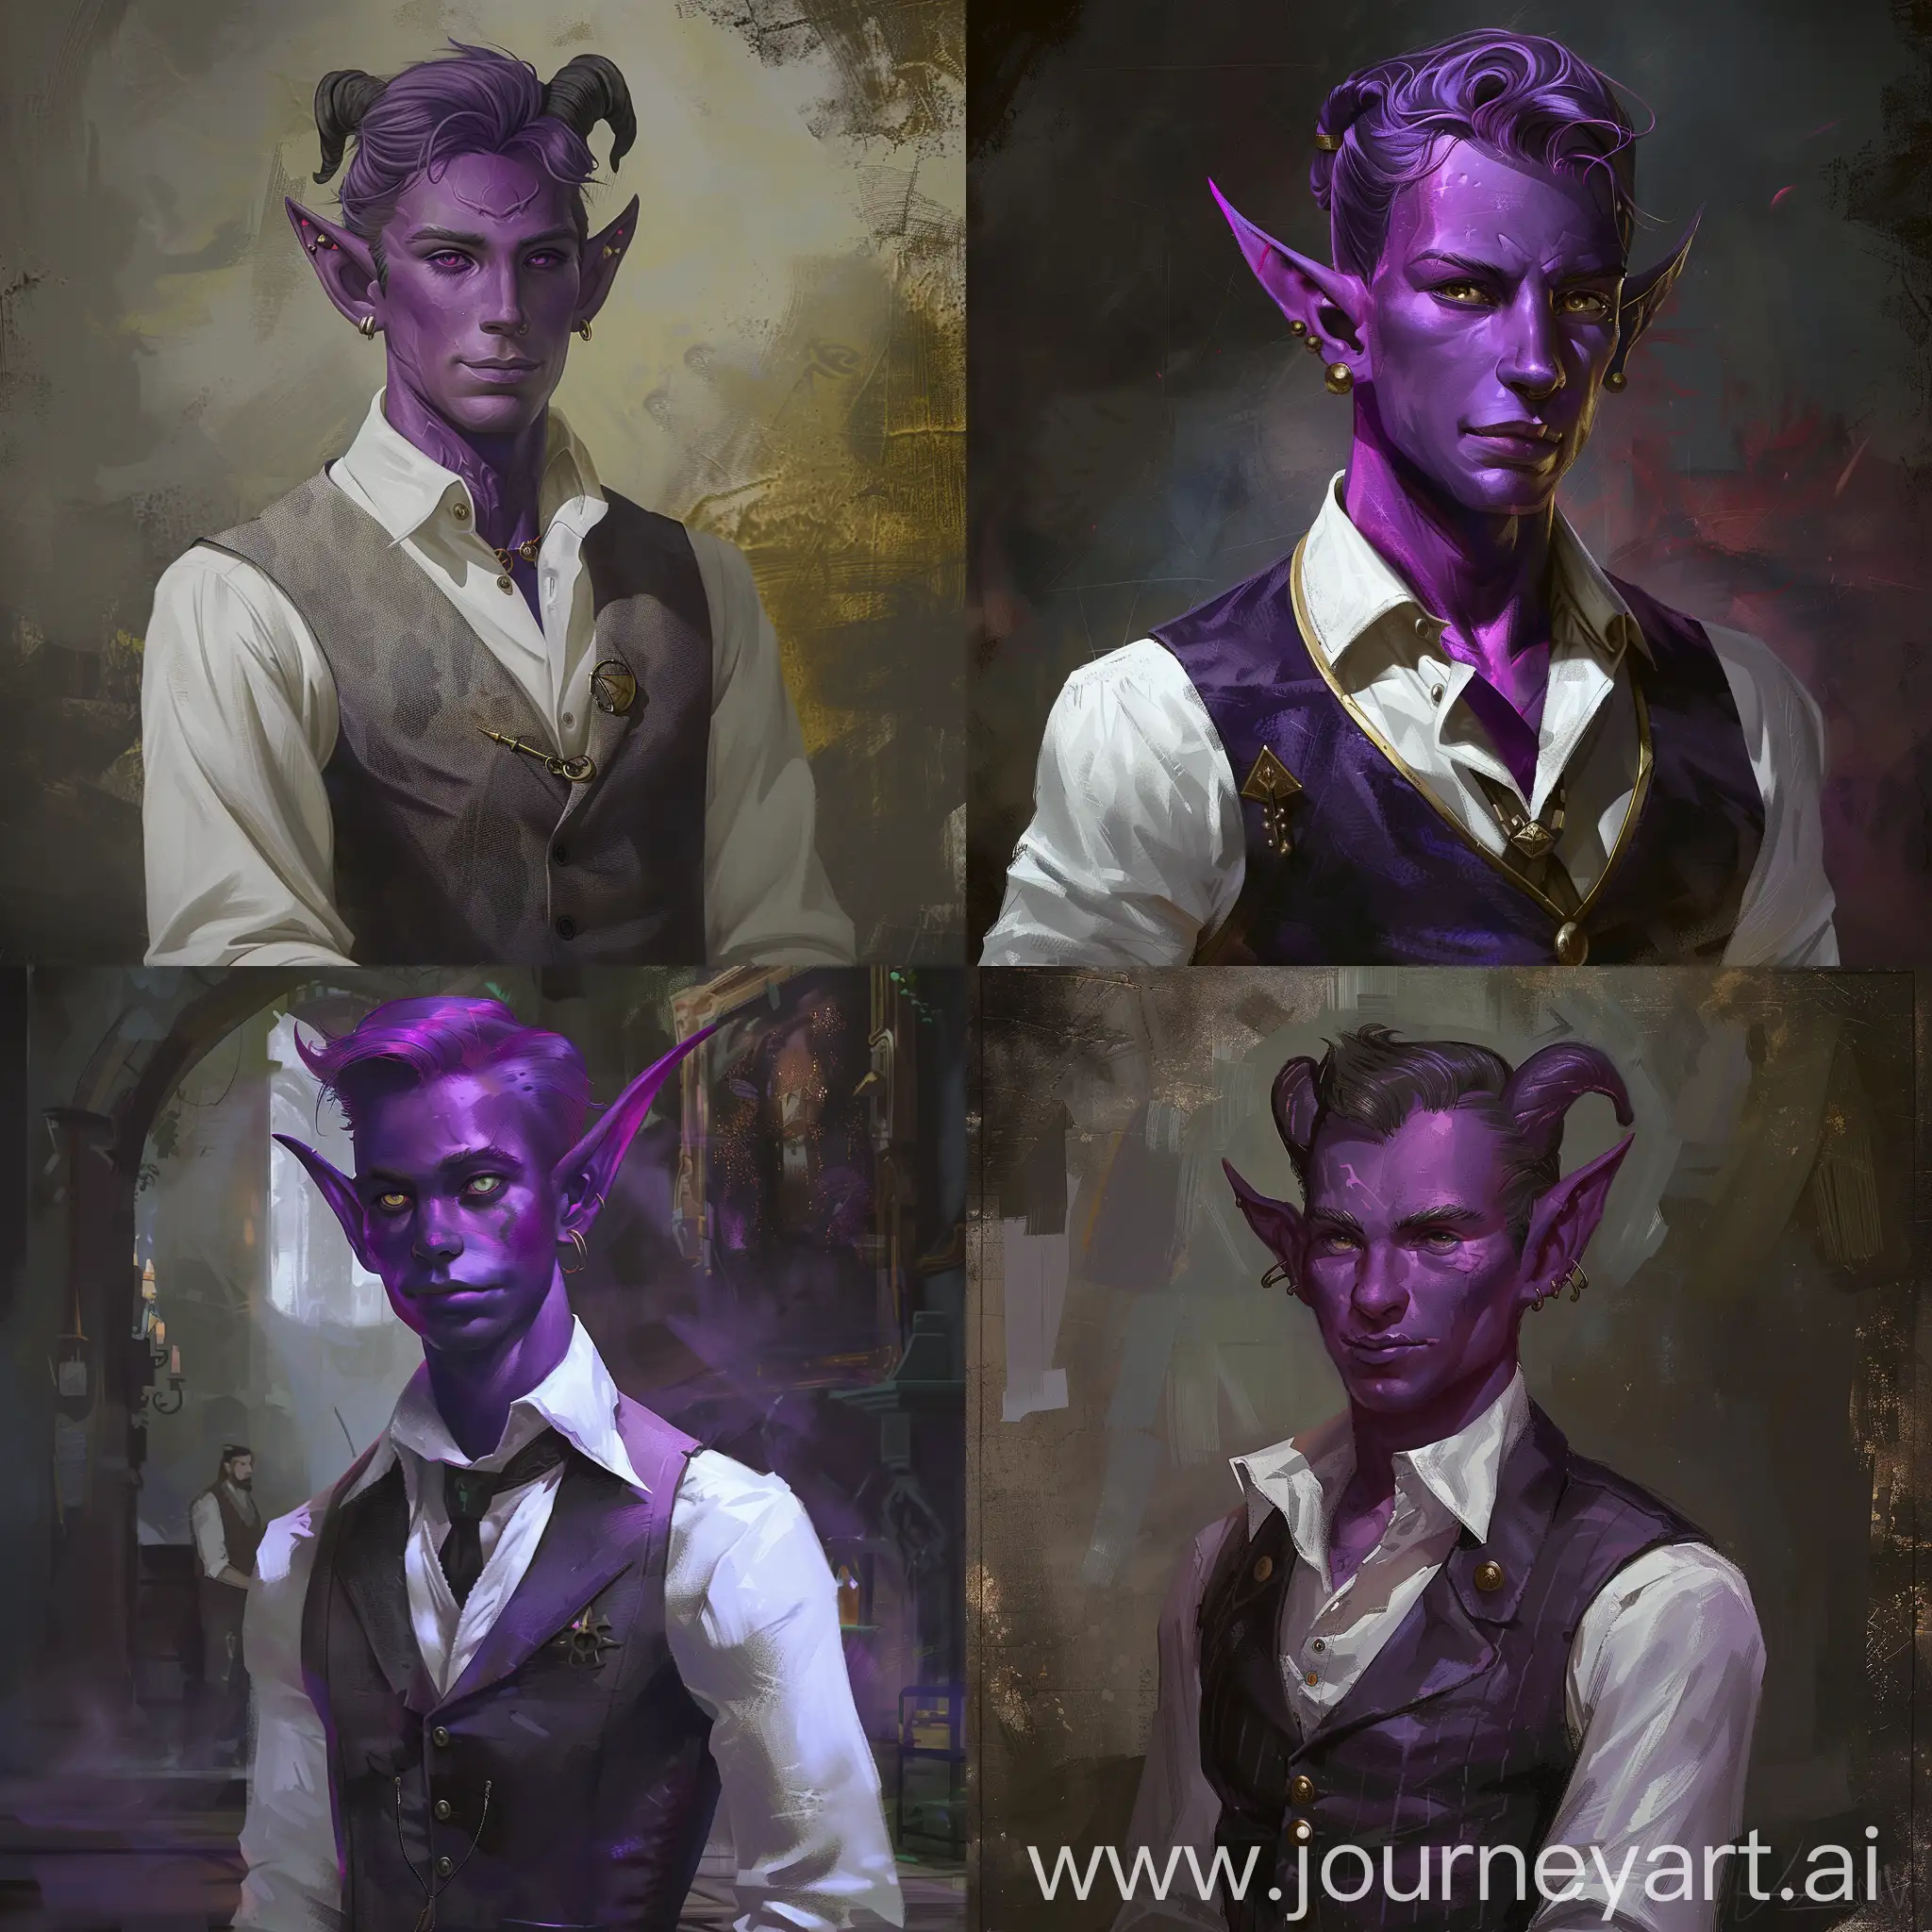 
D&D portrait. A young tiefling male artificer with violet skin, dressed in suit vest and white shirt.